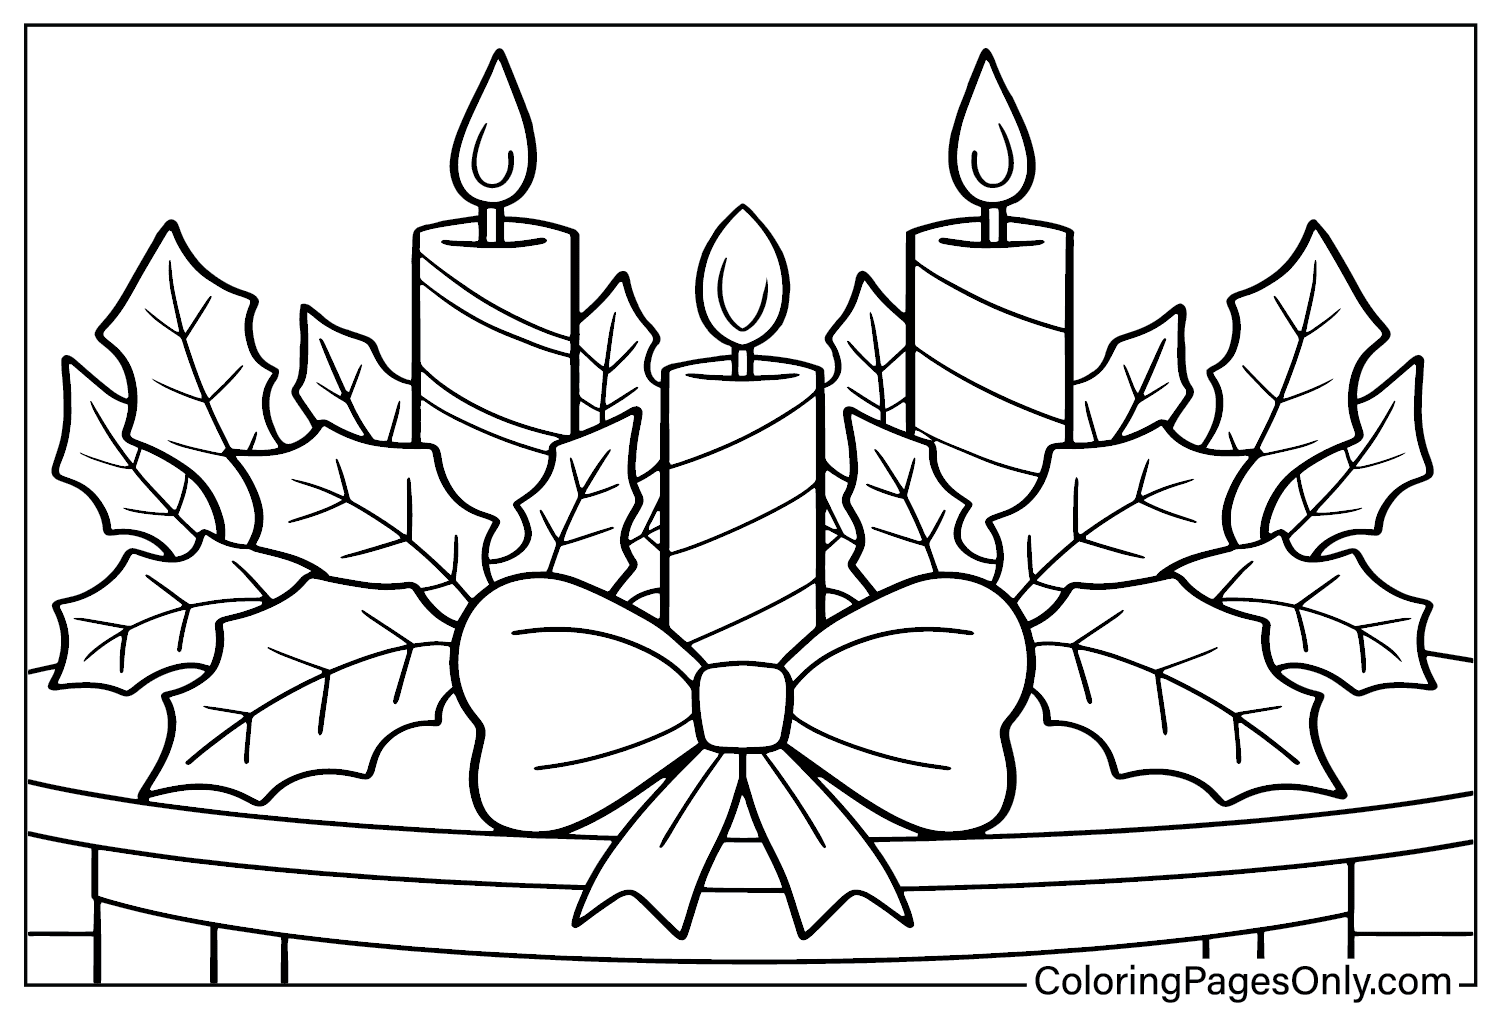 Printable Advent Wreath Coloring Page from Advent Wreath